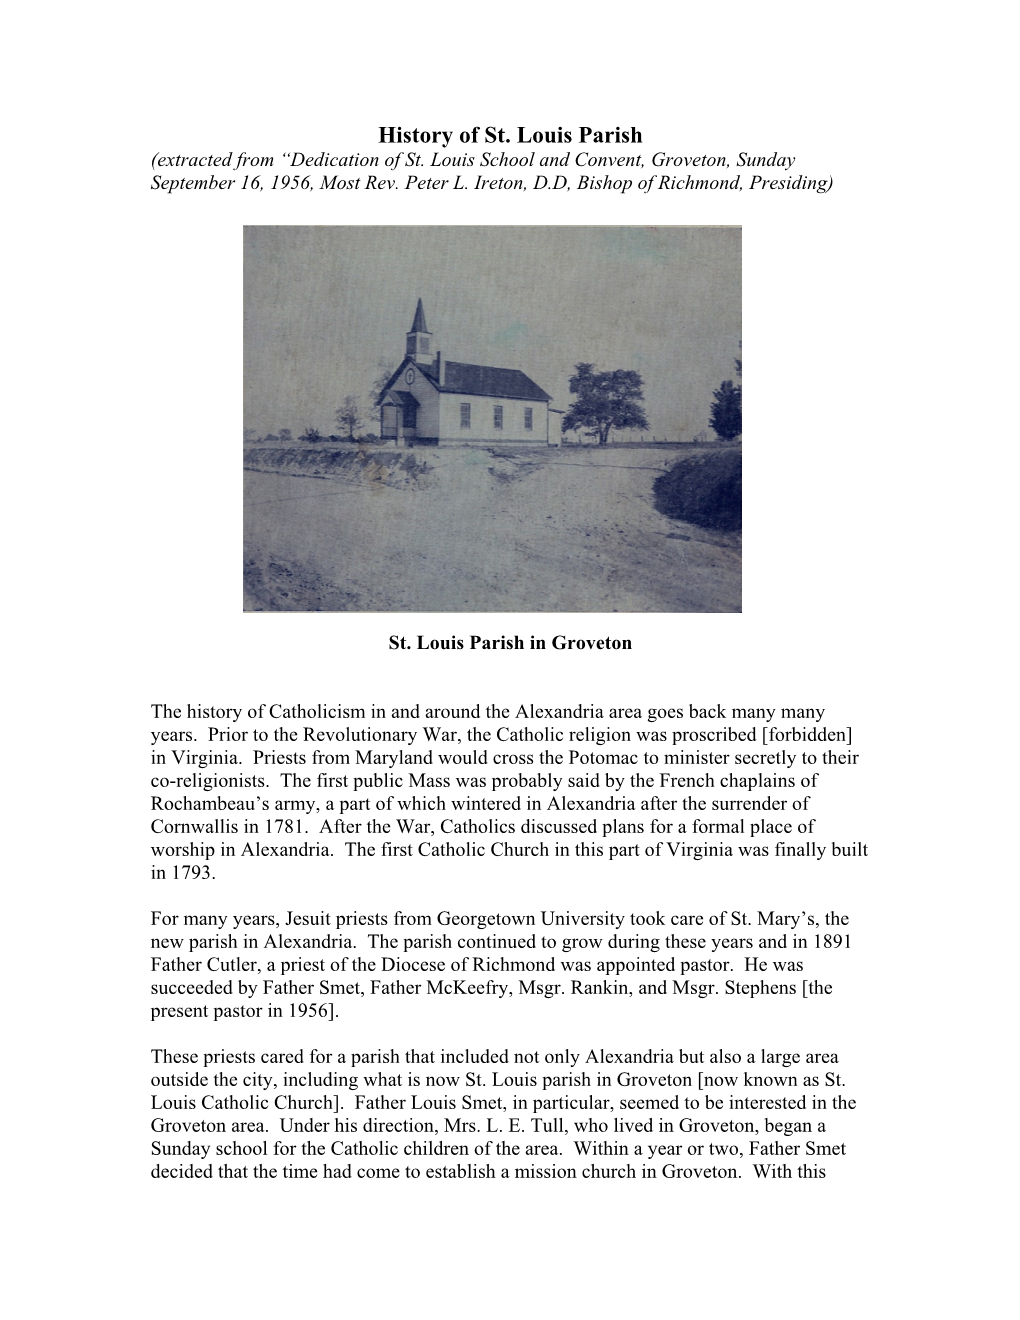 History of St. Louis Parish (Extracted from “Dedication of St